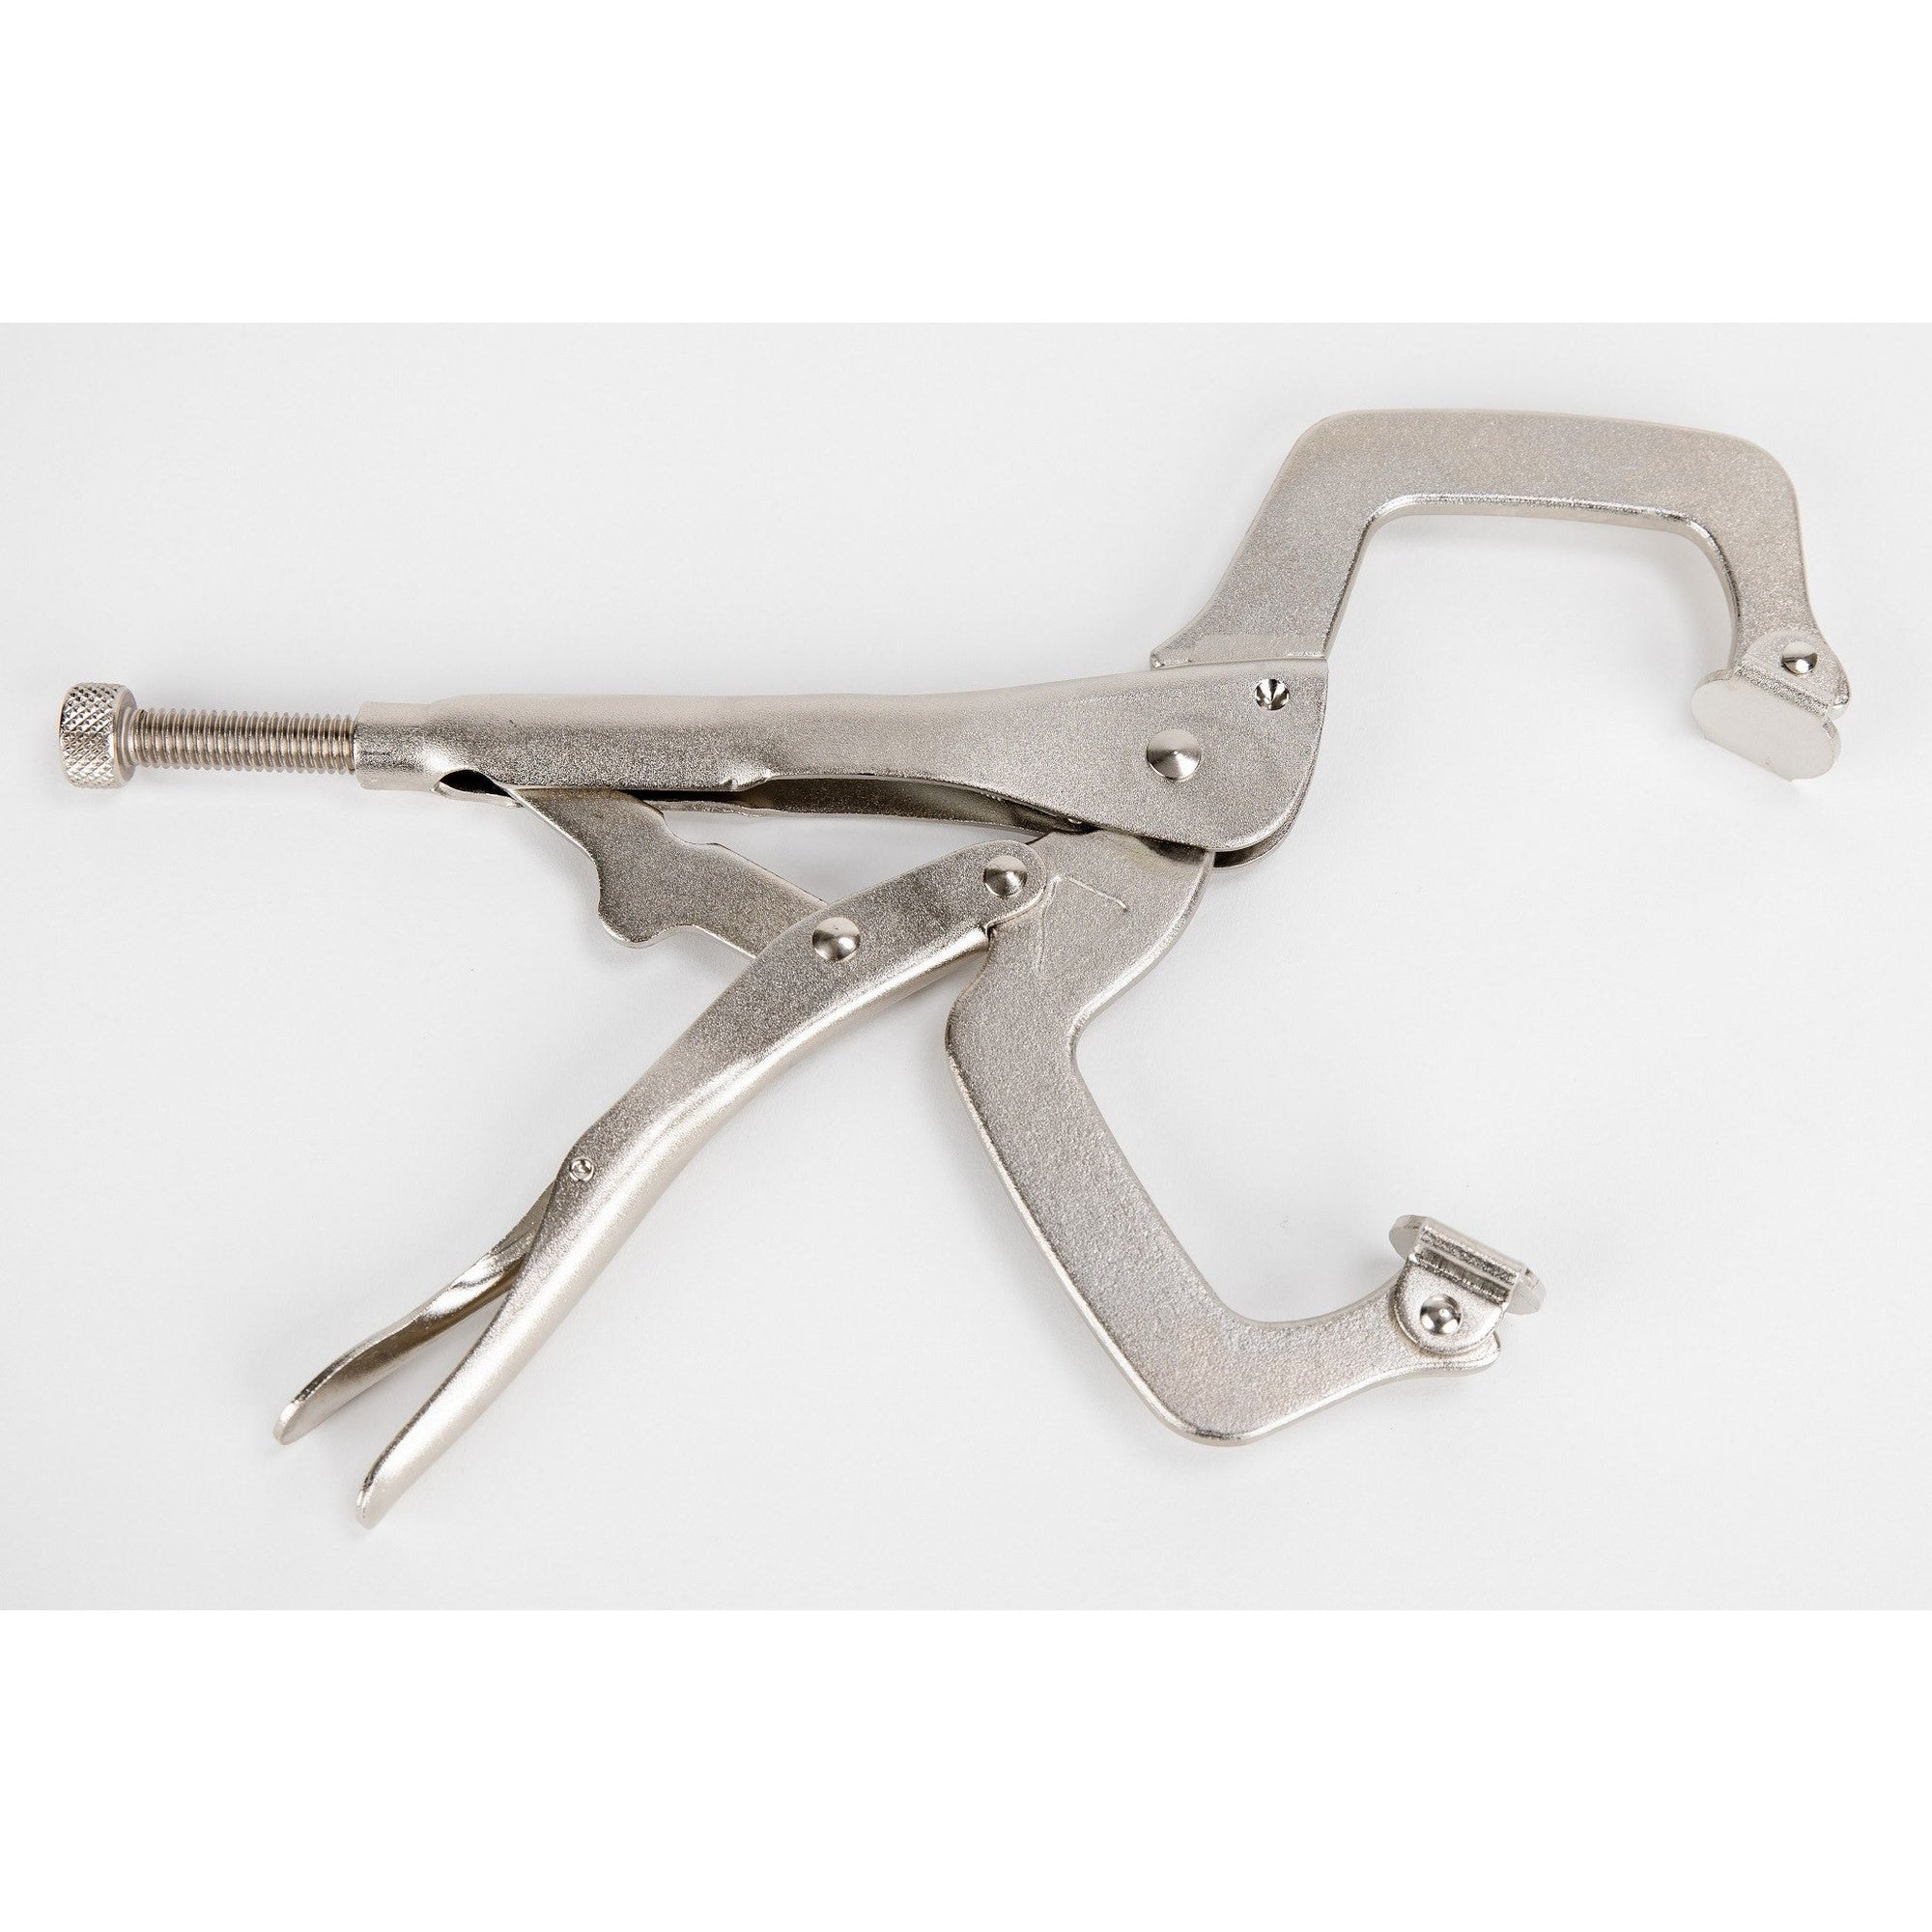 Clamps - 11" C-Clamps Locking Pliers With Pads - Nickel Plated - Rock River